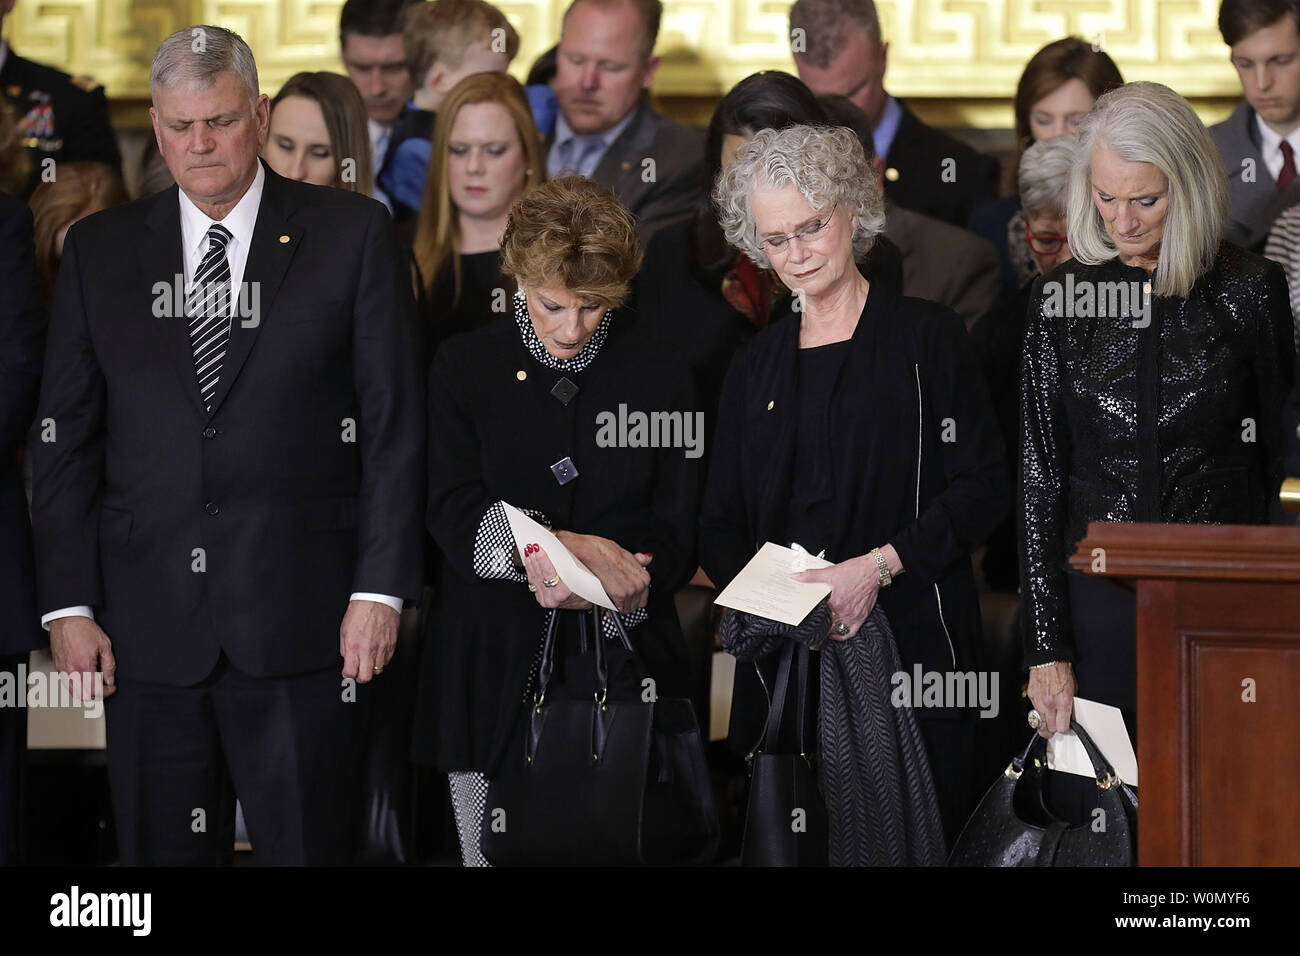 Christian evangelist and Southern Baptist minister Billy Graham's children (L-R) Franklin Graham, Gigi Graham, Ruth Graham and Anne Graham Lotz attend a ceremony to honor their father as his  body lies in honor in the U.S. Capitol Rotunda February 28, 2018 in Washington, DC. A spiritual counselor for every president from Harry Truman to Barack Obama and other world leaders for more than 60 years, Graham died February 21 at the age of 99.  Photo by Chip Somodevilla/UPI Stock Photo